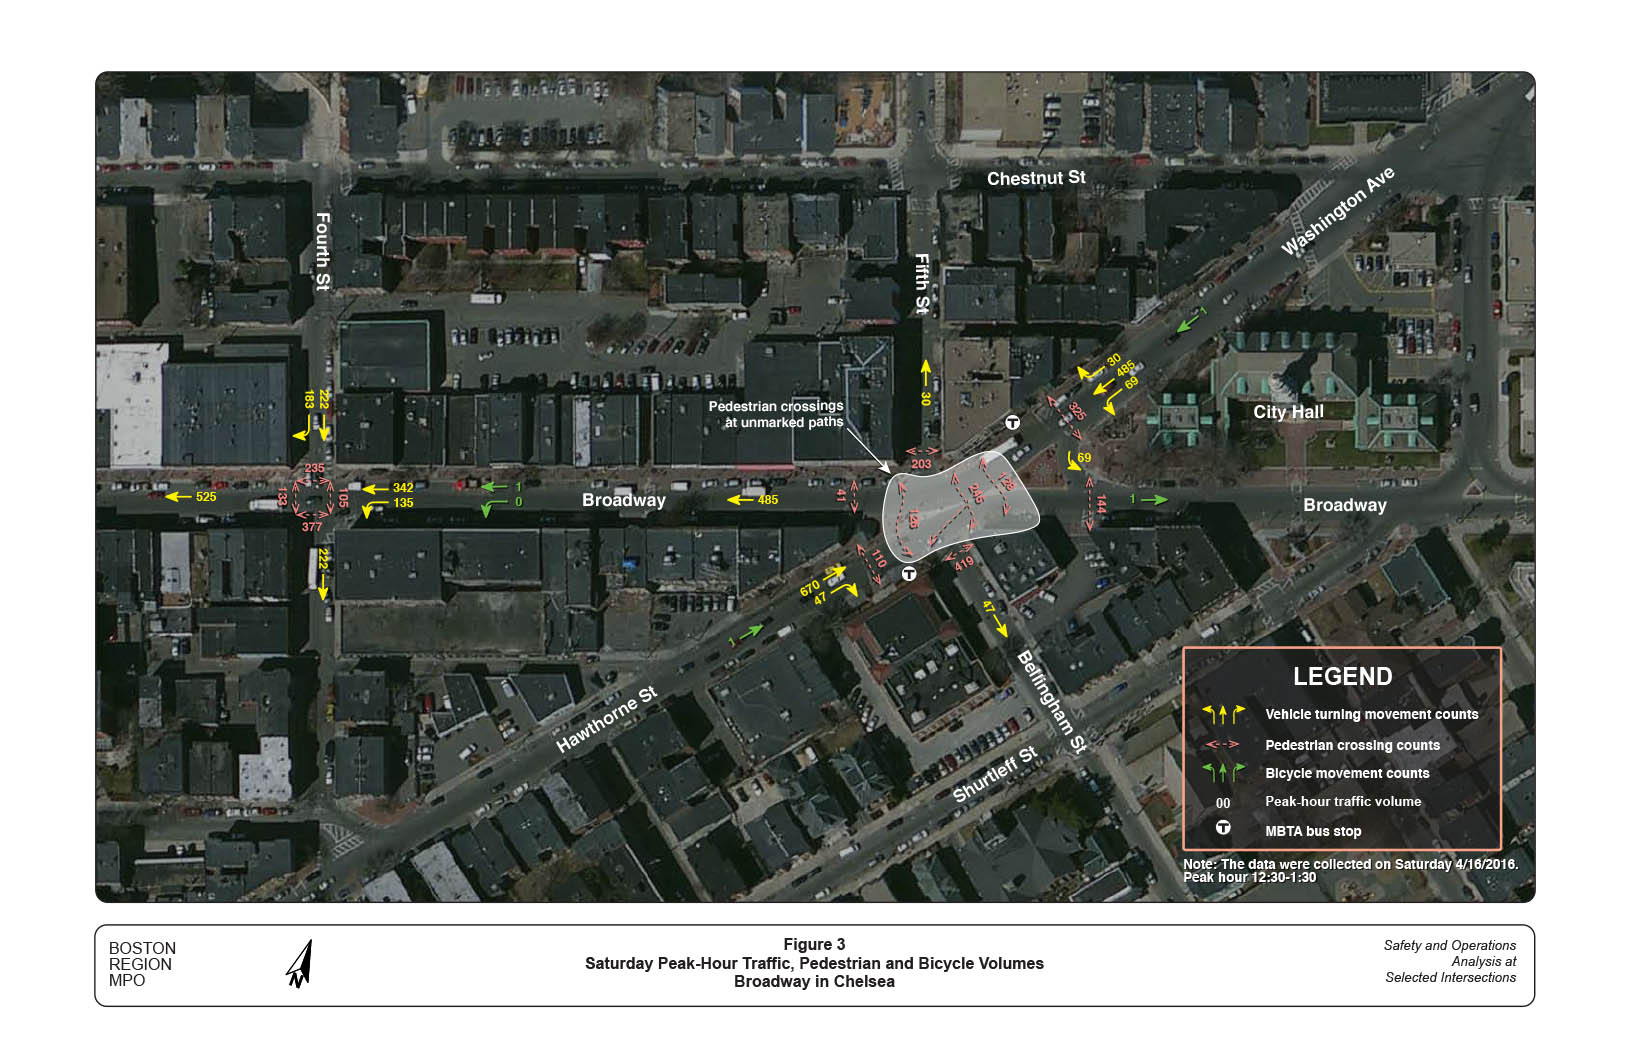 Figure 3 — Saturday Peak-Hour Traffic, Pedestrian and Bicycle Volumes
Aerial view of study area with computer-drawn superimposed notations that show: peak-hour traffic volume, pedestrian crossing counts, vehicle turning movement counts, bicycle movement counts, and MBTA bus stop.
